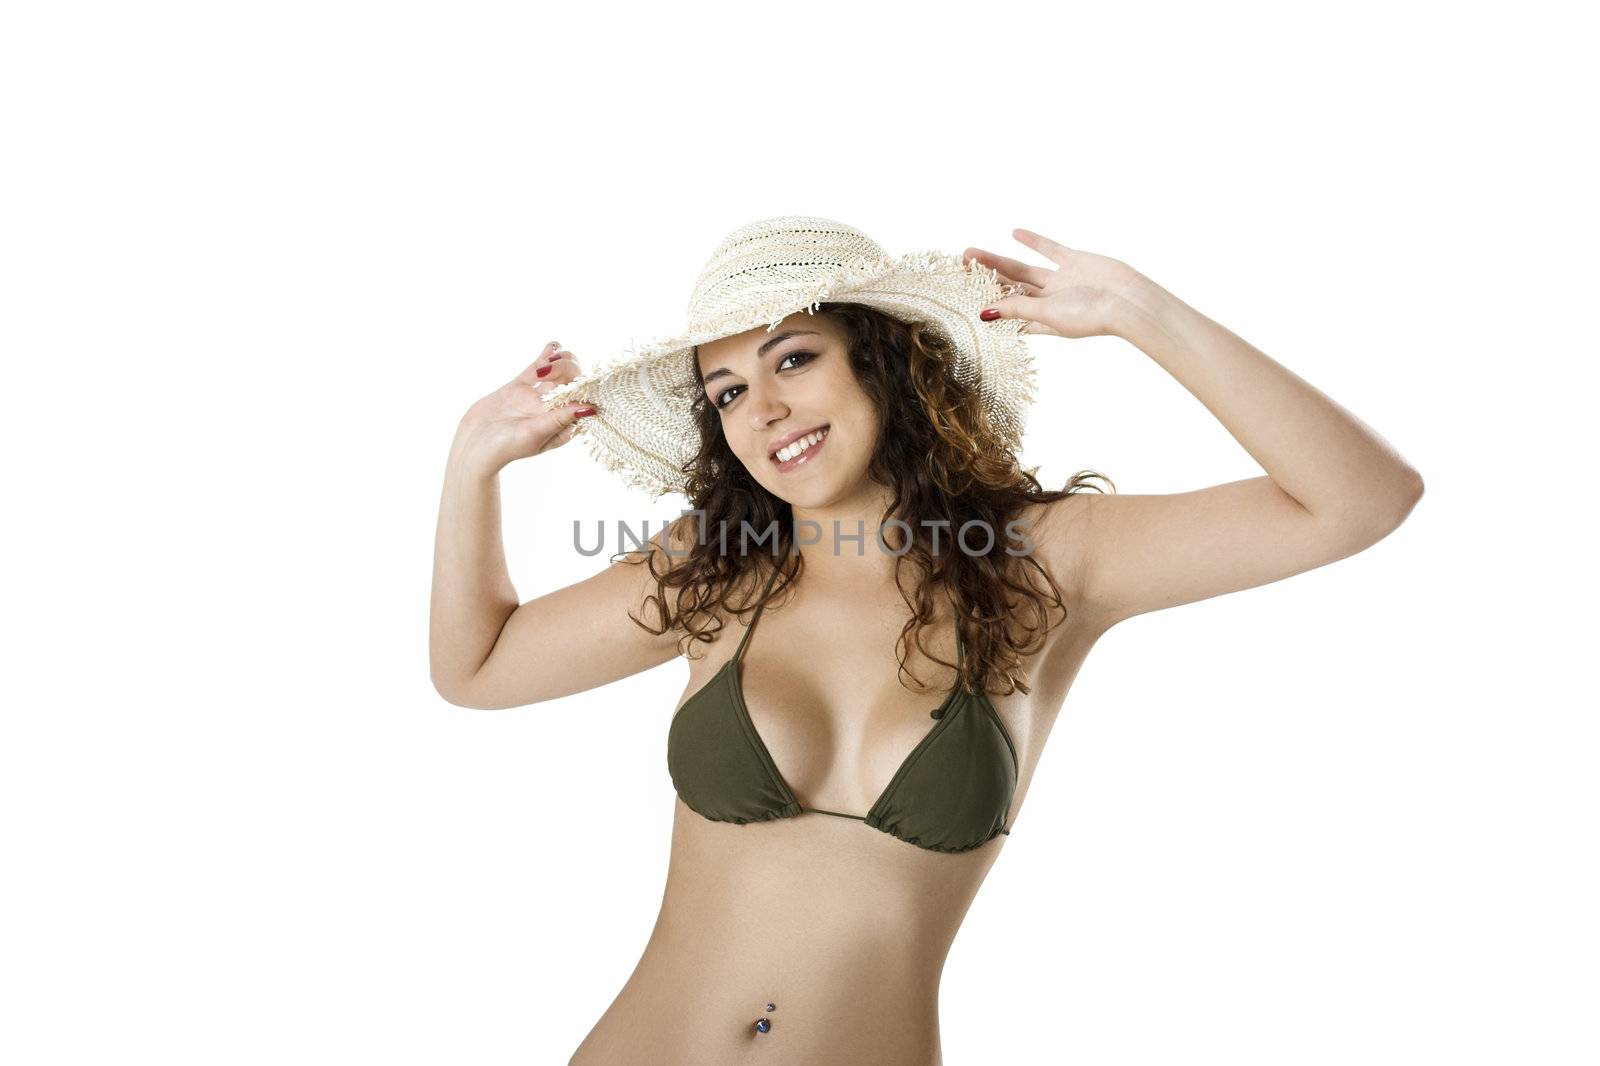 Portrait of a beautiful young woman in bikini posing on a white background